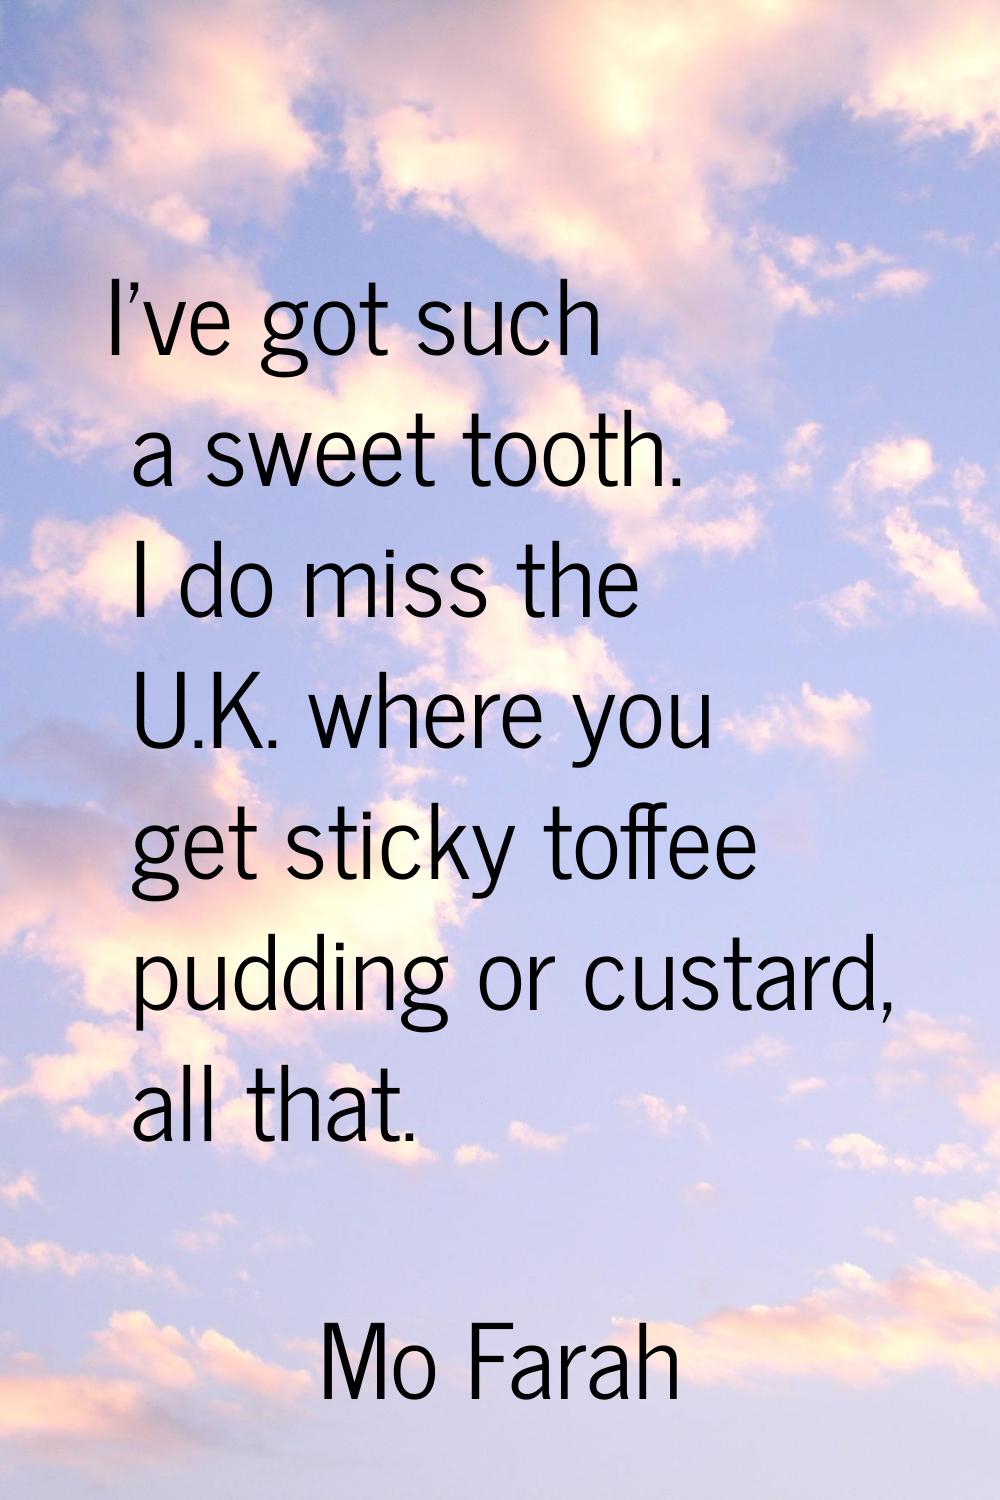 I've got such a sweet tooth. I do miss the U.K. where you get sticky toffee pudding or custard, all